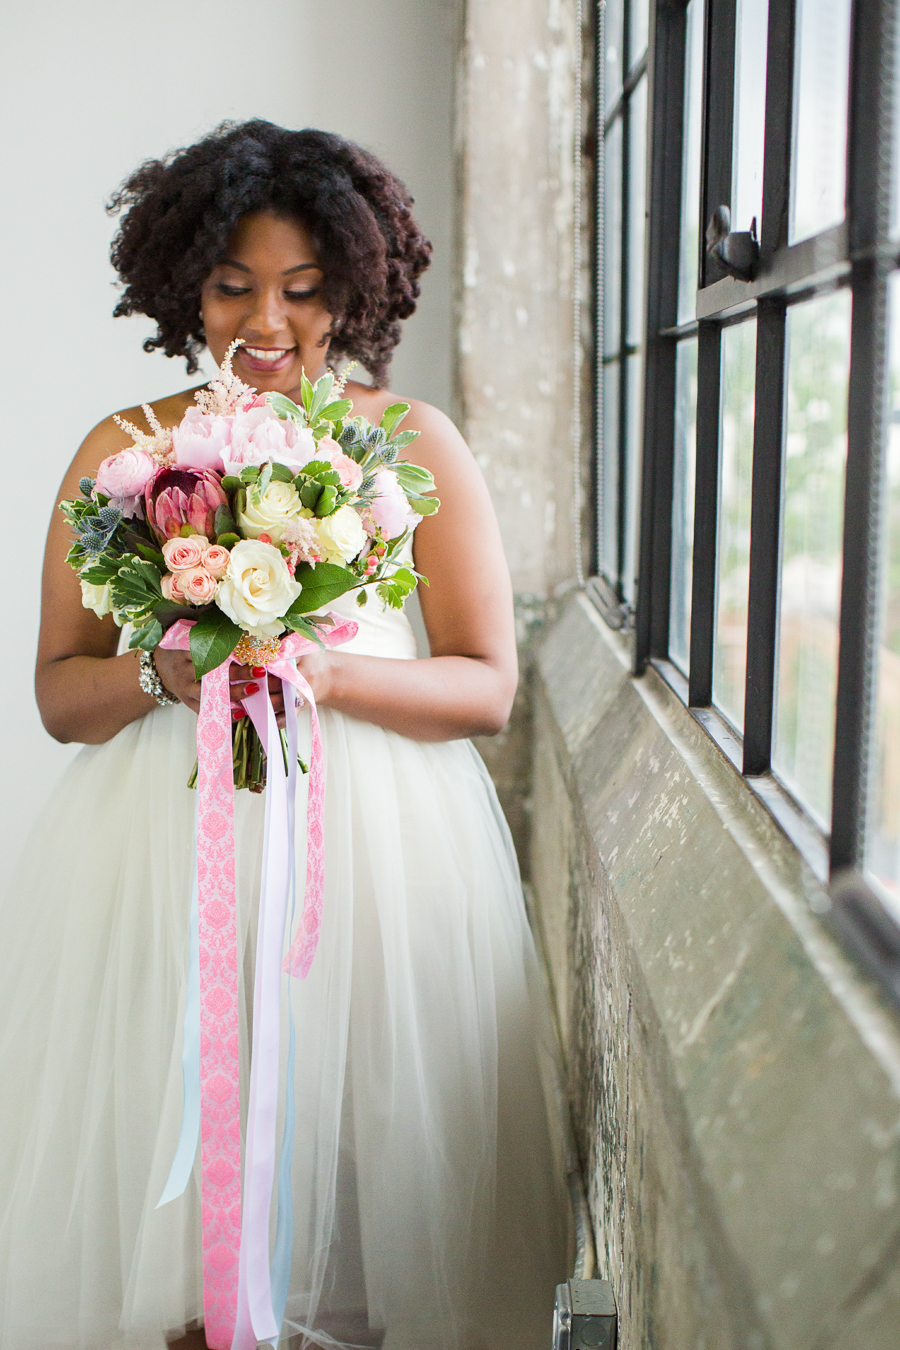 Houston Tuesdays Together (Rising Tide Society) Pantone Colors Styled Shoot, African American Bride, Colorful Wedding Bouquet